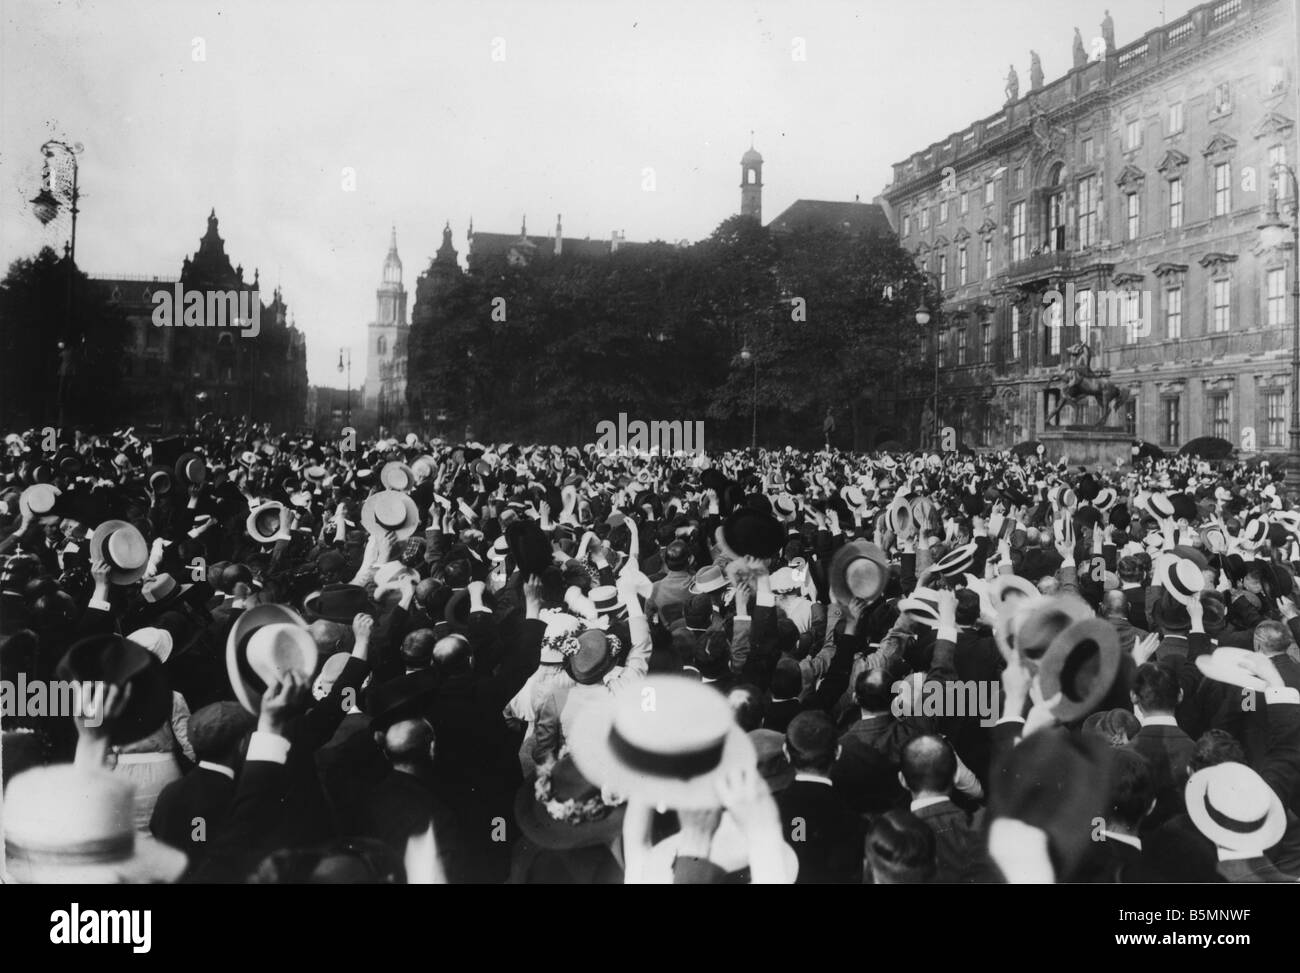 8 1914 8 1 A3 10 E Kaiser Wilhelm Outbreak of war 1914 World War I Mobilisation on 31 July 1914 in Berlin Crowds in front of the Stock Photo